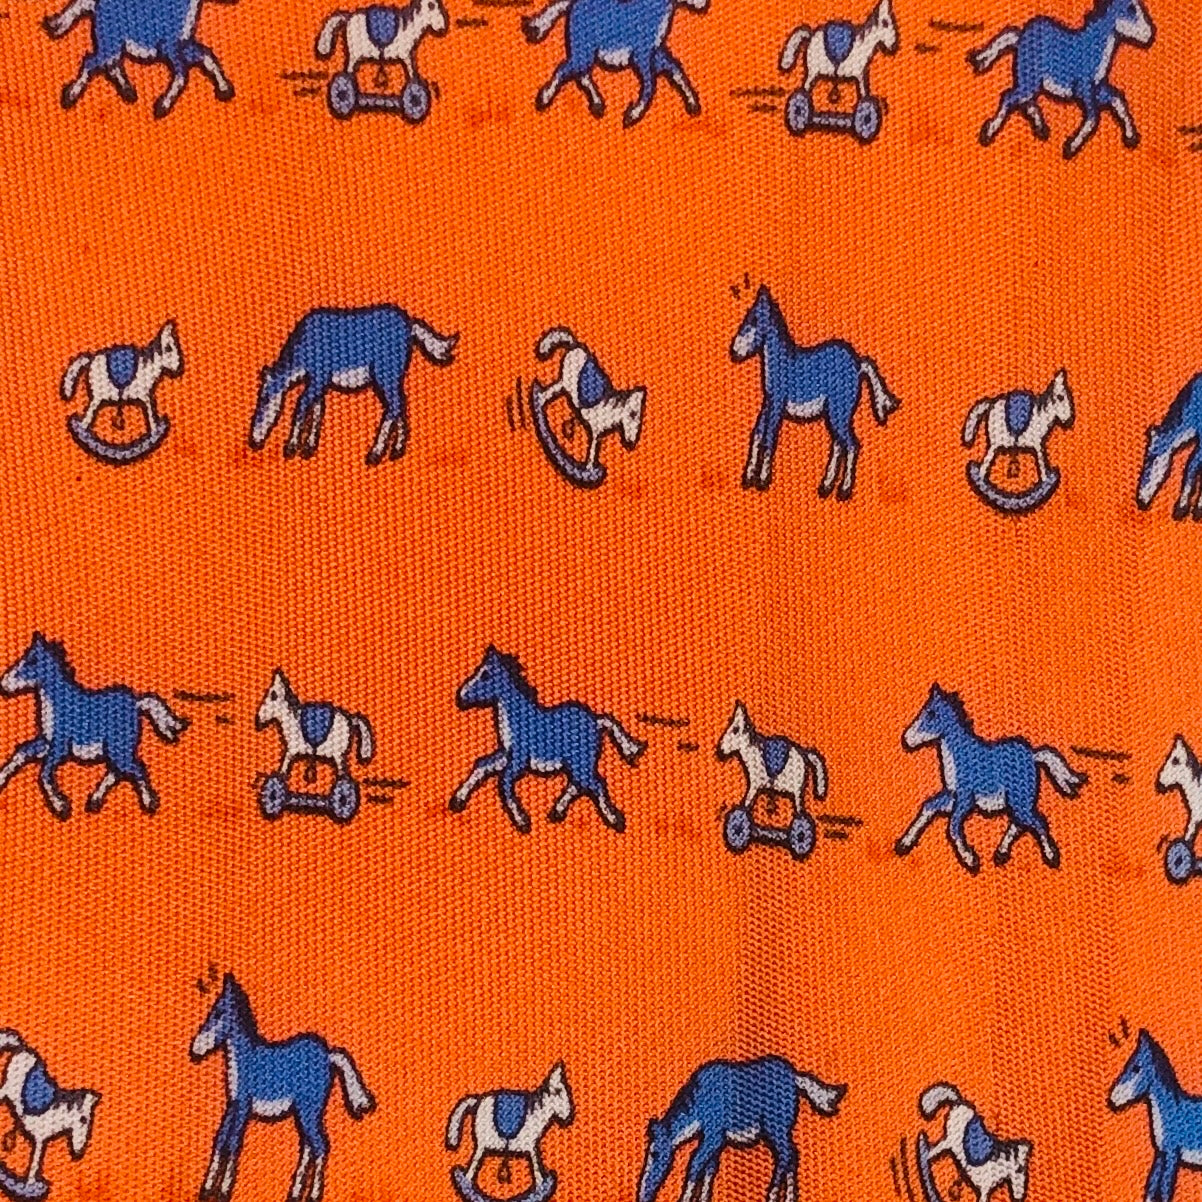 Tailormade fabric: Hermes